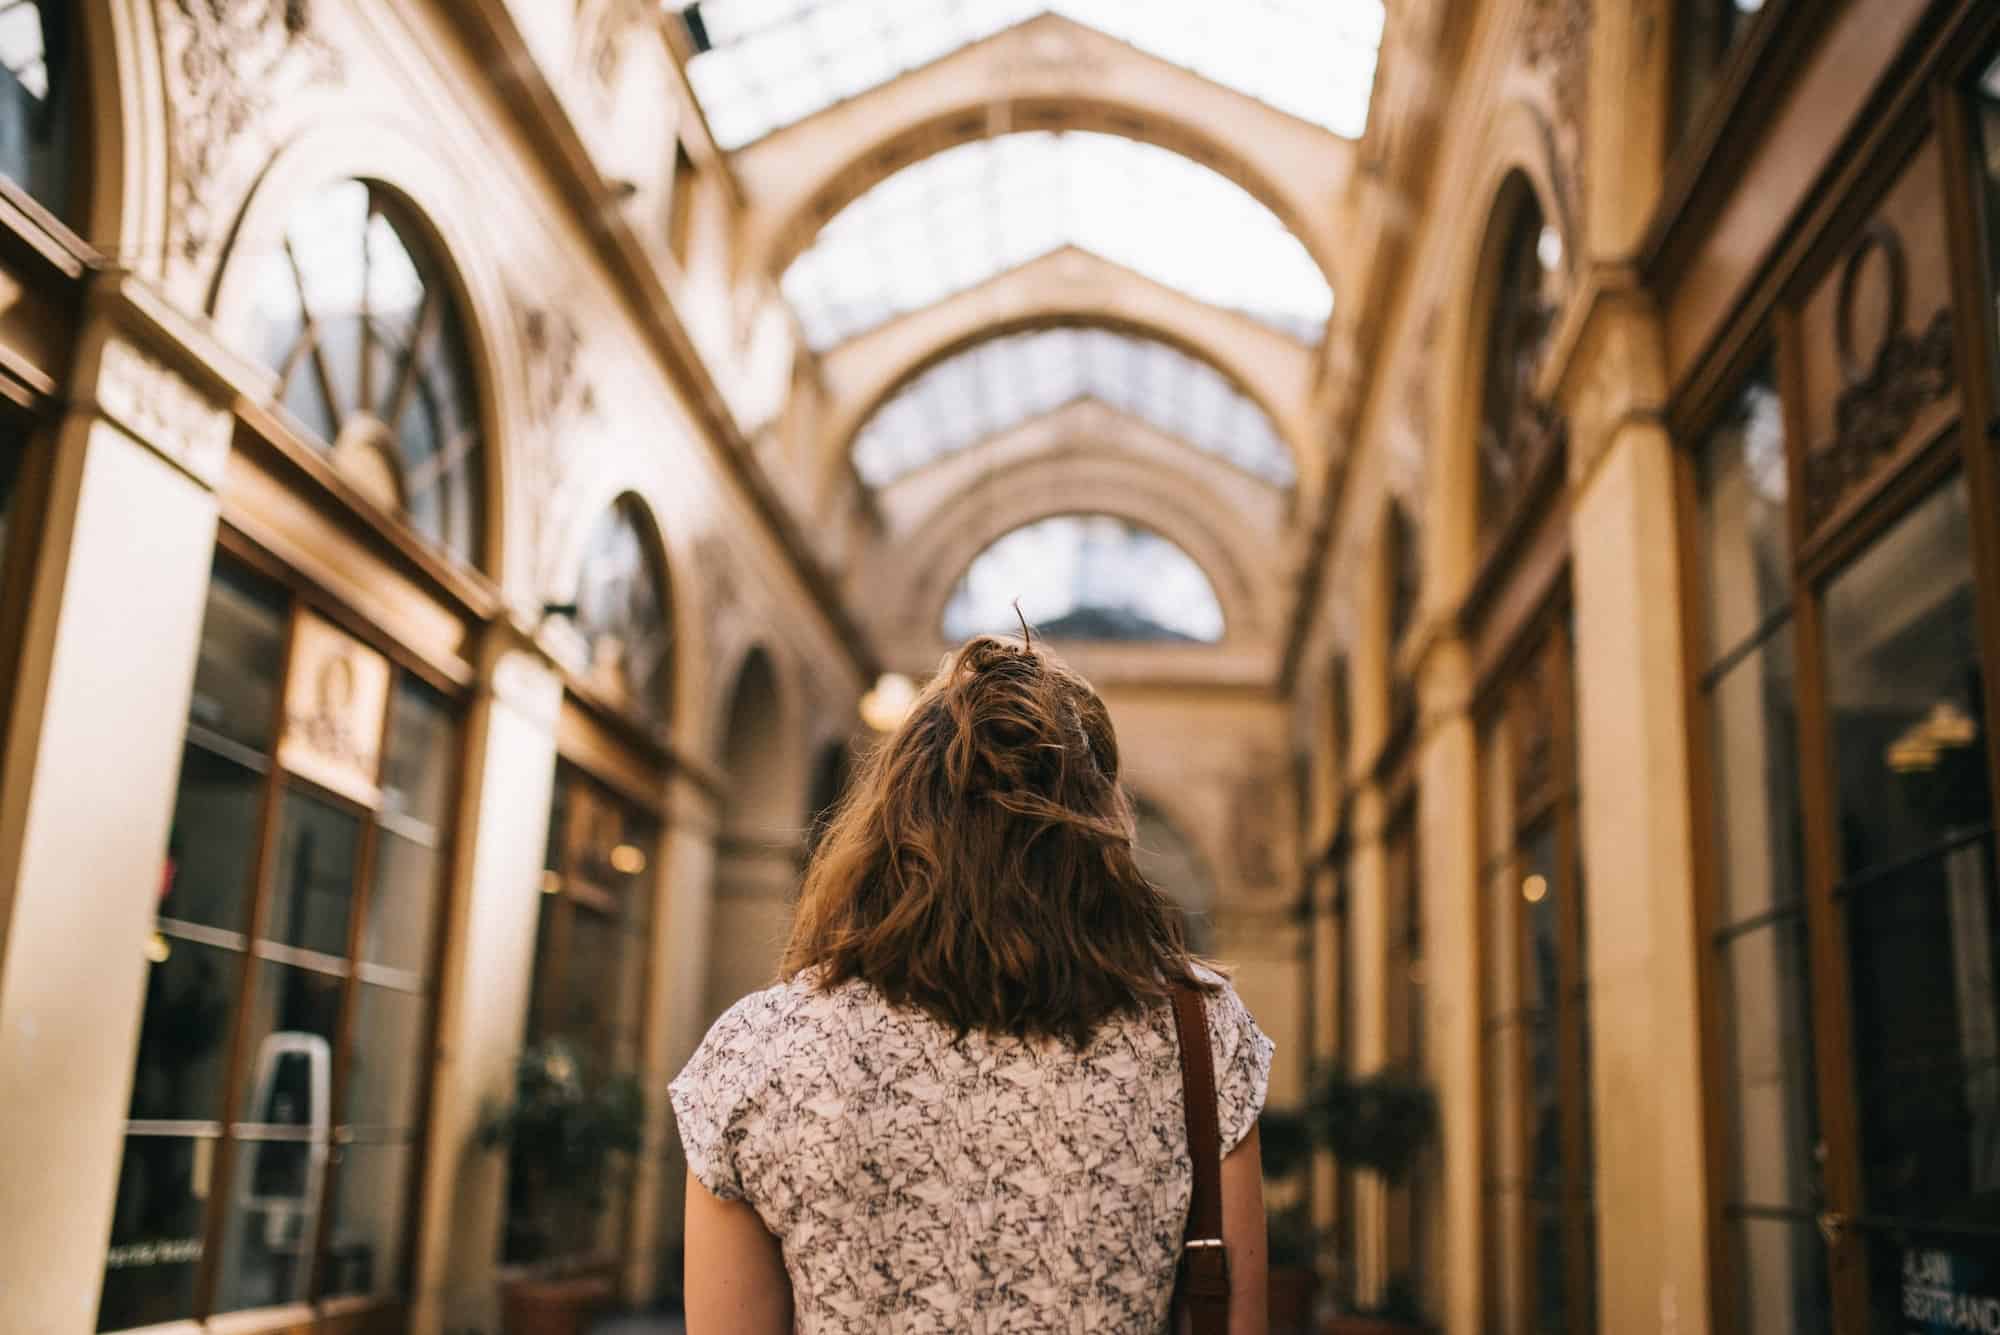 We want to know what your favorite places to explore in Paris are, like this girl, who loves to visit Paris' covered passageways.